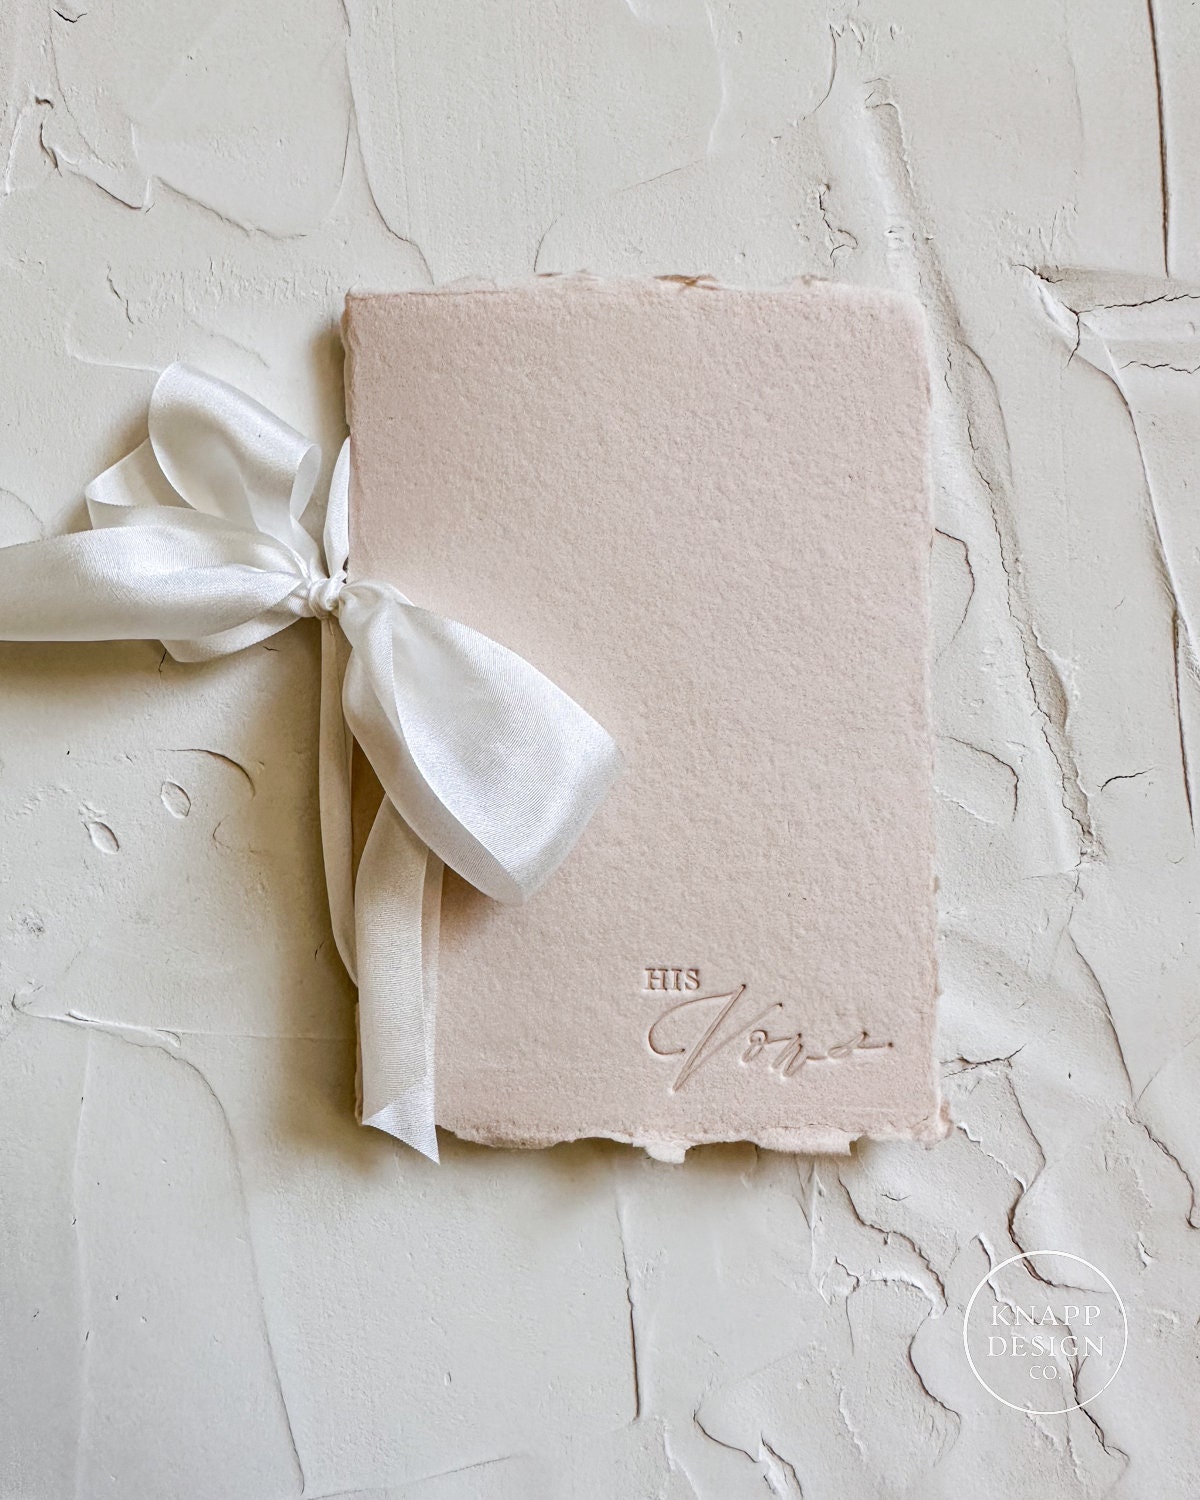 HIS & HERS Vow Books, letterpressed with silk ribbon - white Wedding Vow  Books by Cara Jo Knapp